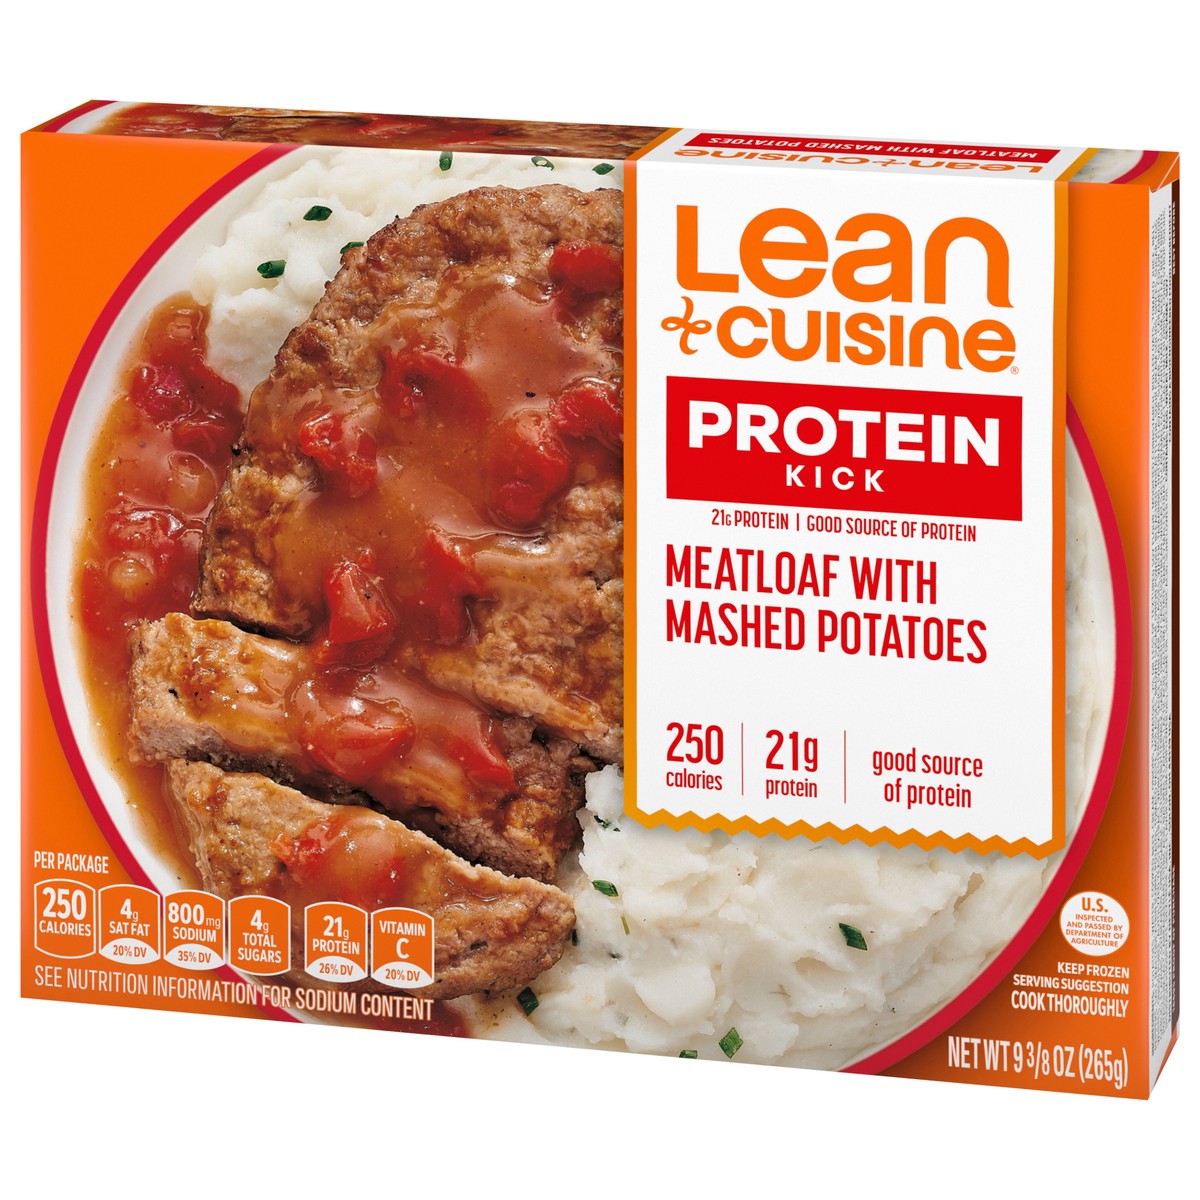 slide 6 of 14, Lean Cuisine Frozen Meal Meatloaf with Mashed Potatoes, Protein Kick Microwave Meal, Meatloaf Dinner, Frozen Dinner for One, 9.38 oz